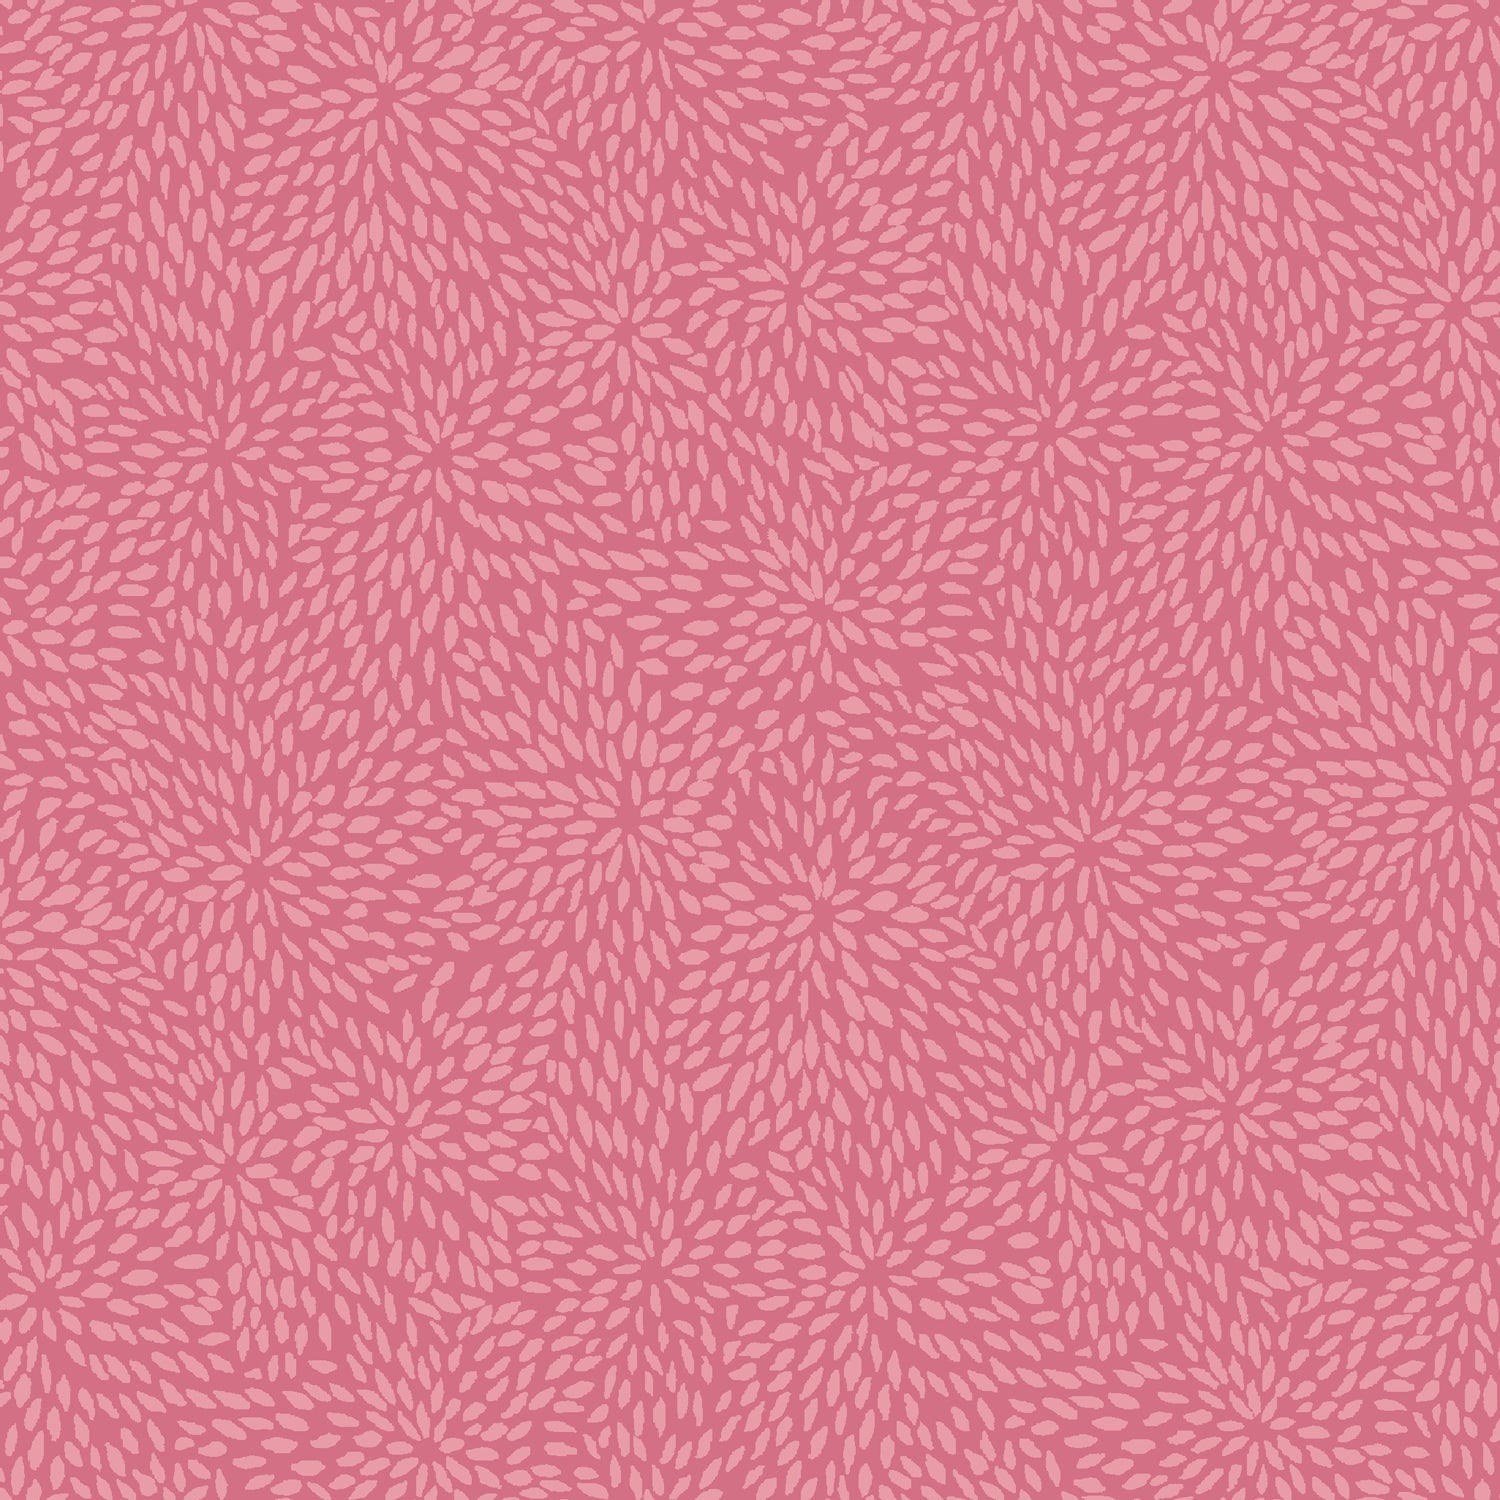 Waverly Inspirations Cotton 44" Burst Coral Color Sewing Fabric by the Yard